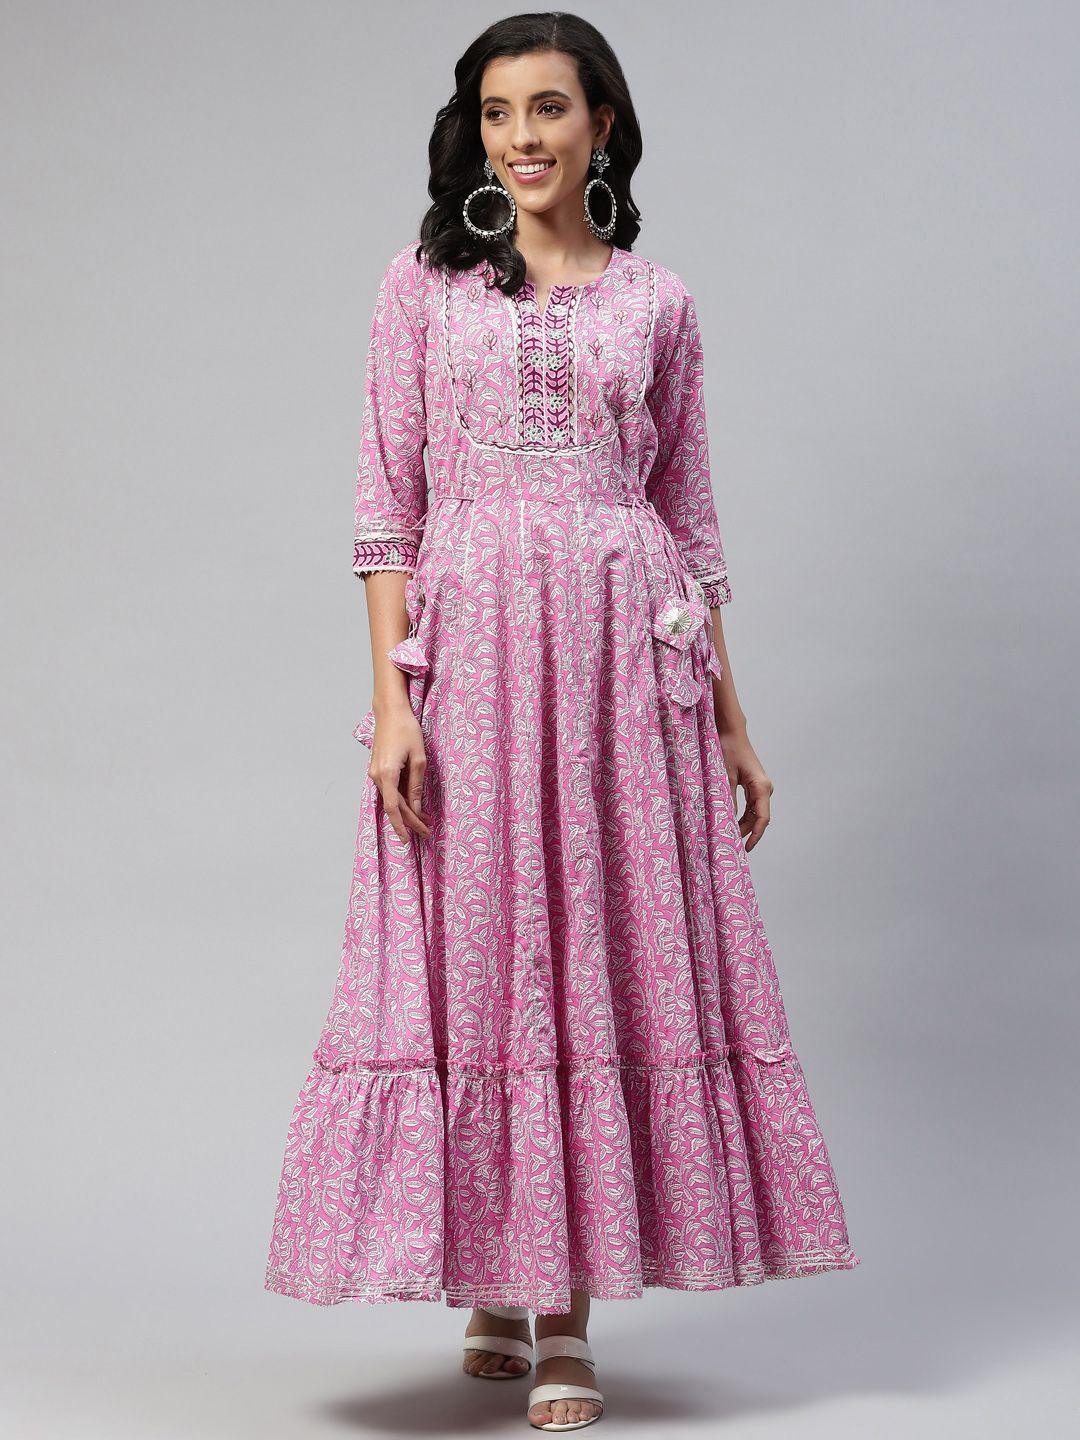 readiprint fashions pink embroidered tiered maxi ethnic dress with tie-up detail